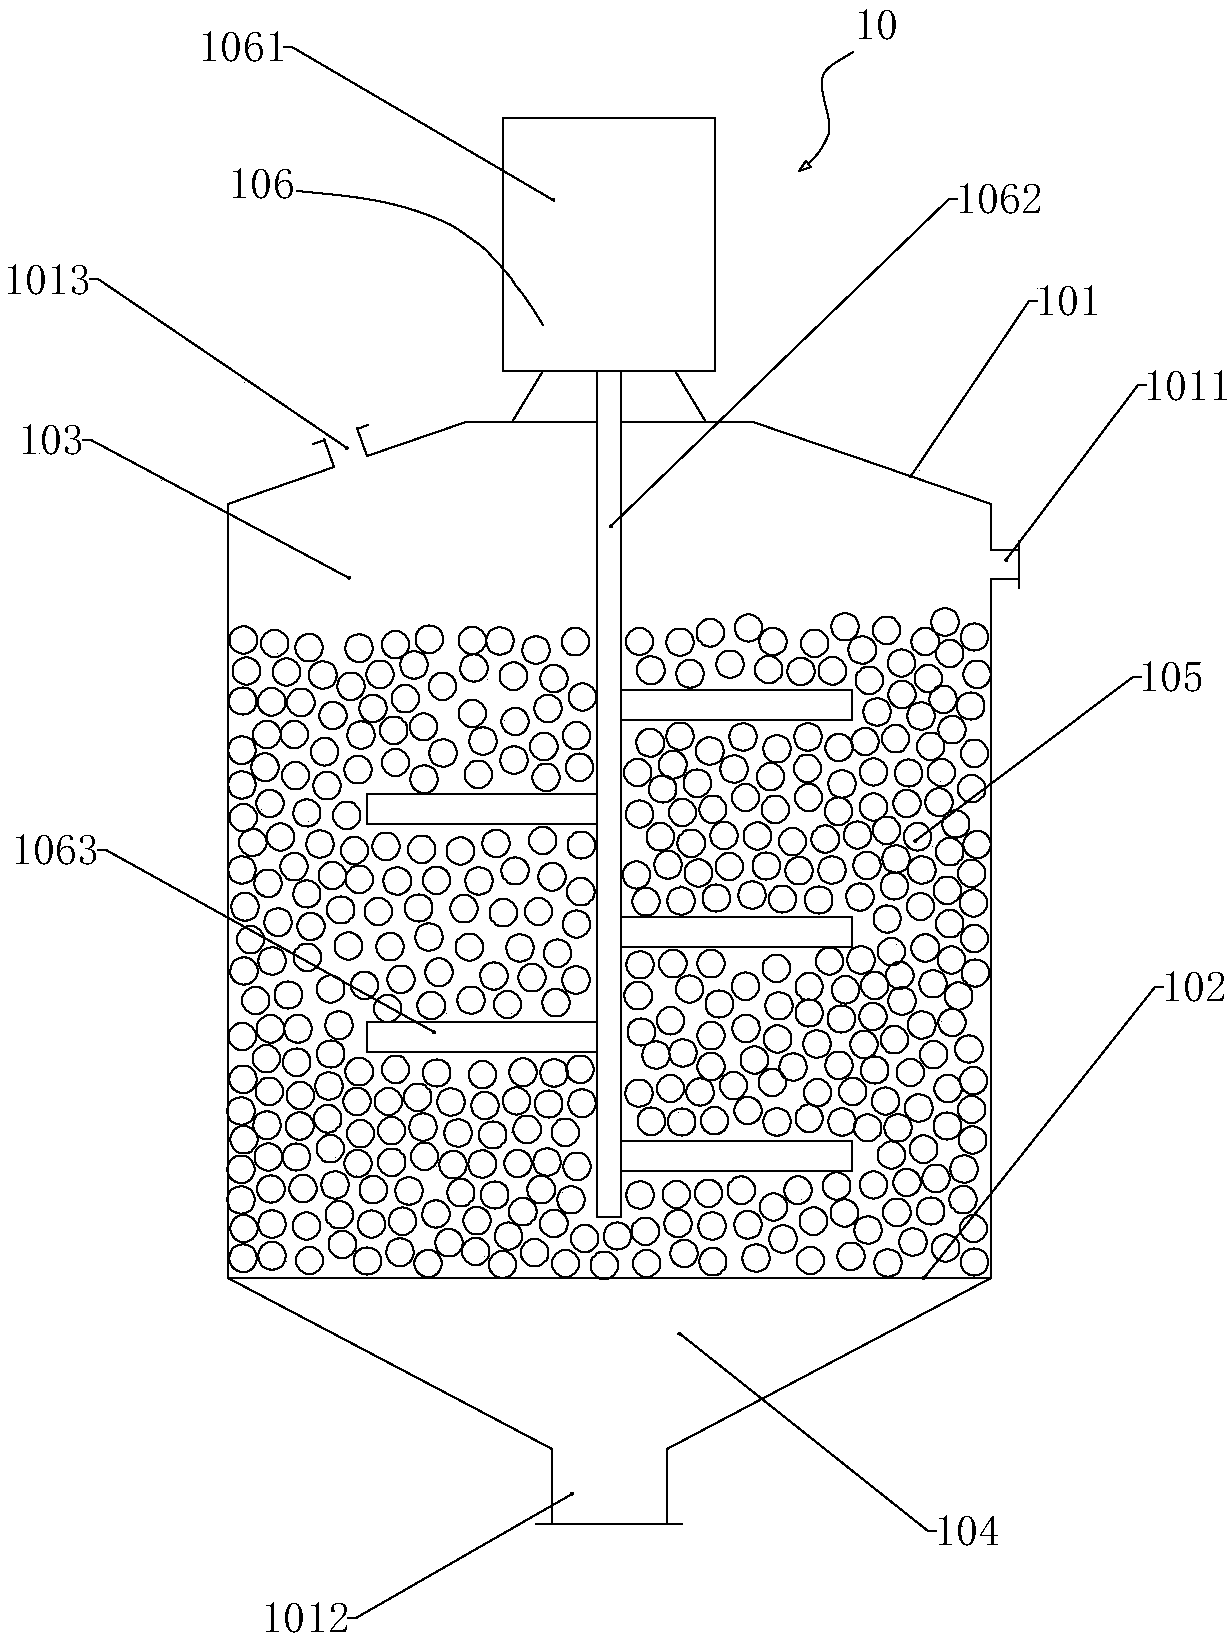 Maturation device and polymer preparation system for chemical flooding oil recovery